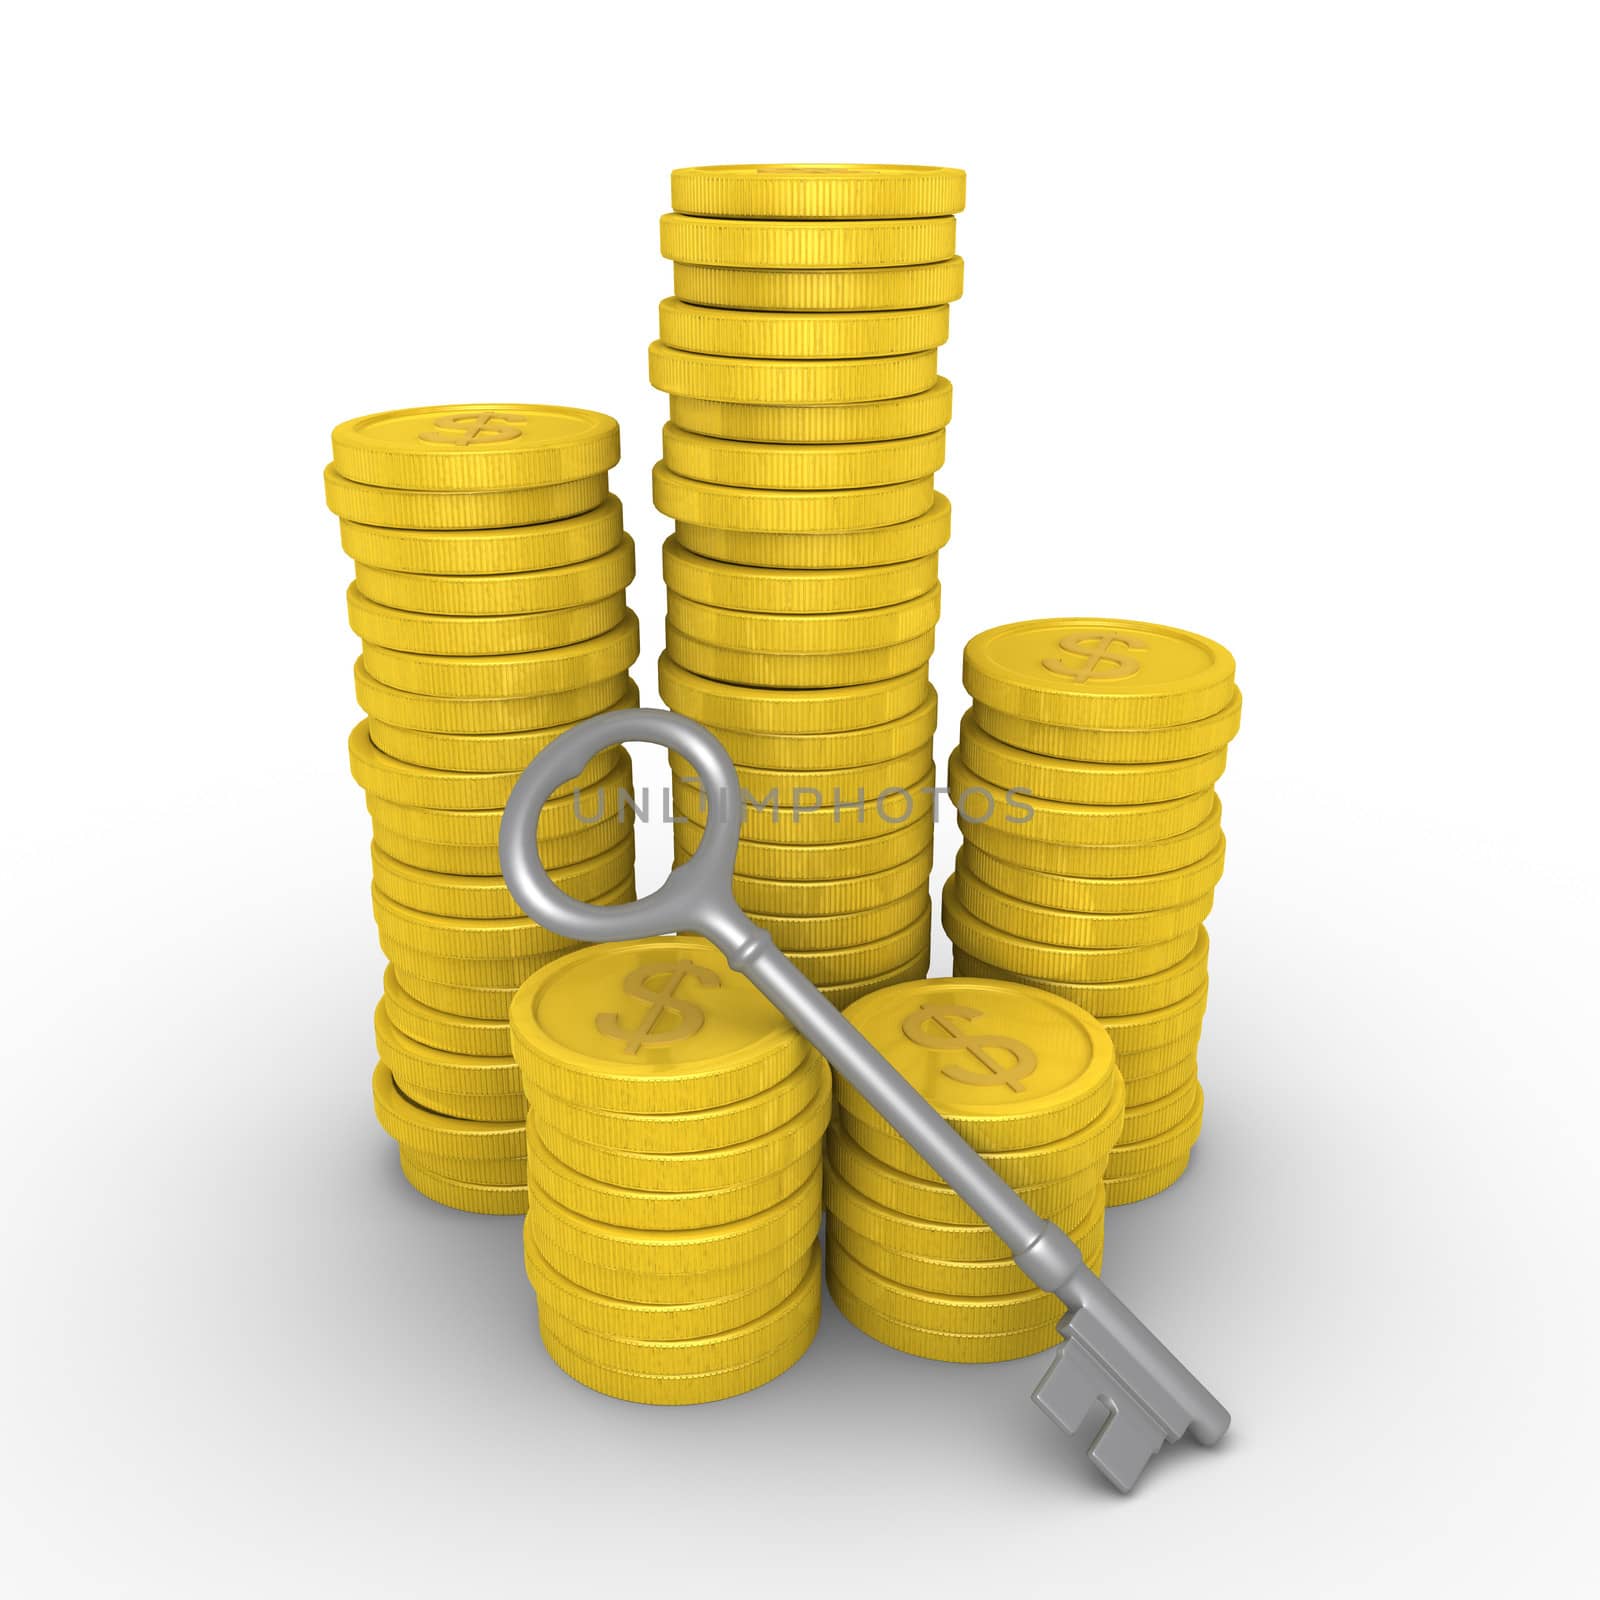 Pile of dollar coins and key by 6kor3dos